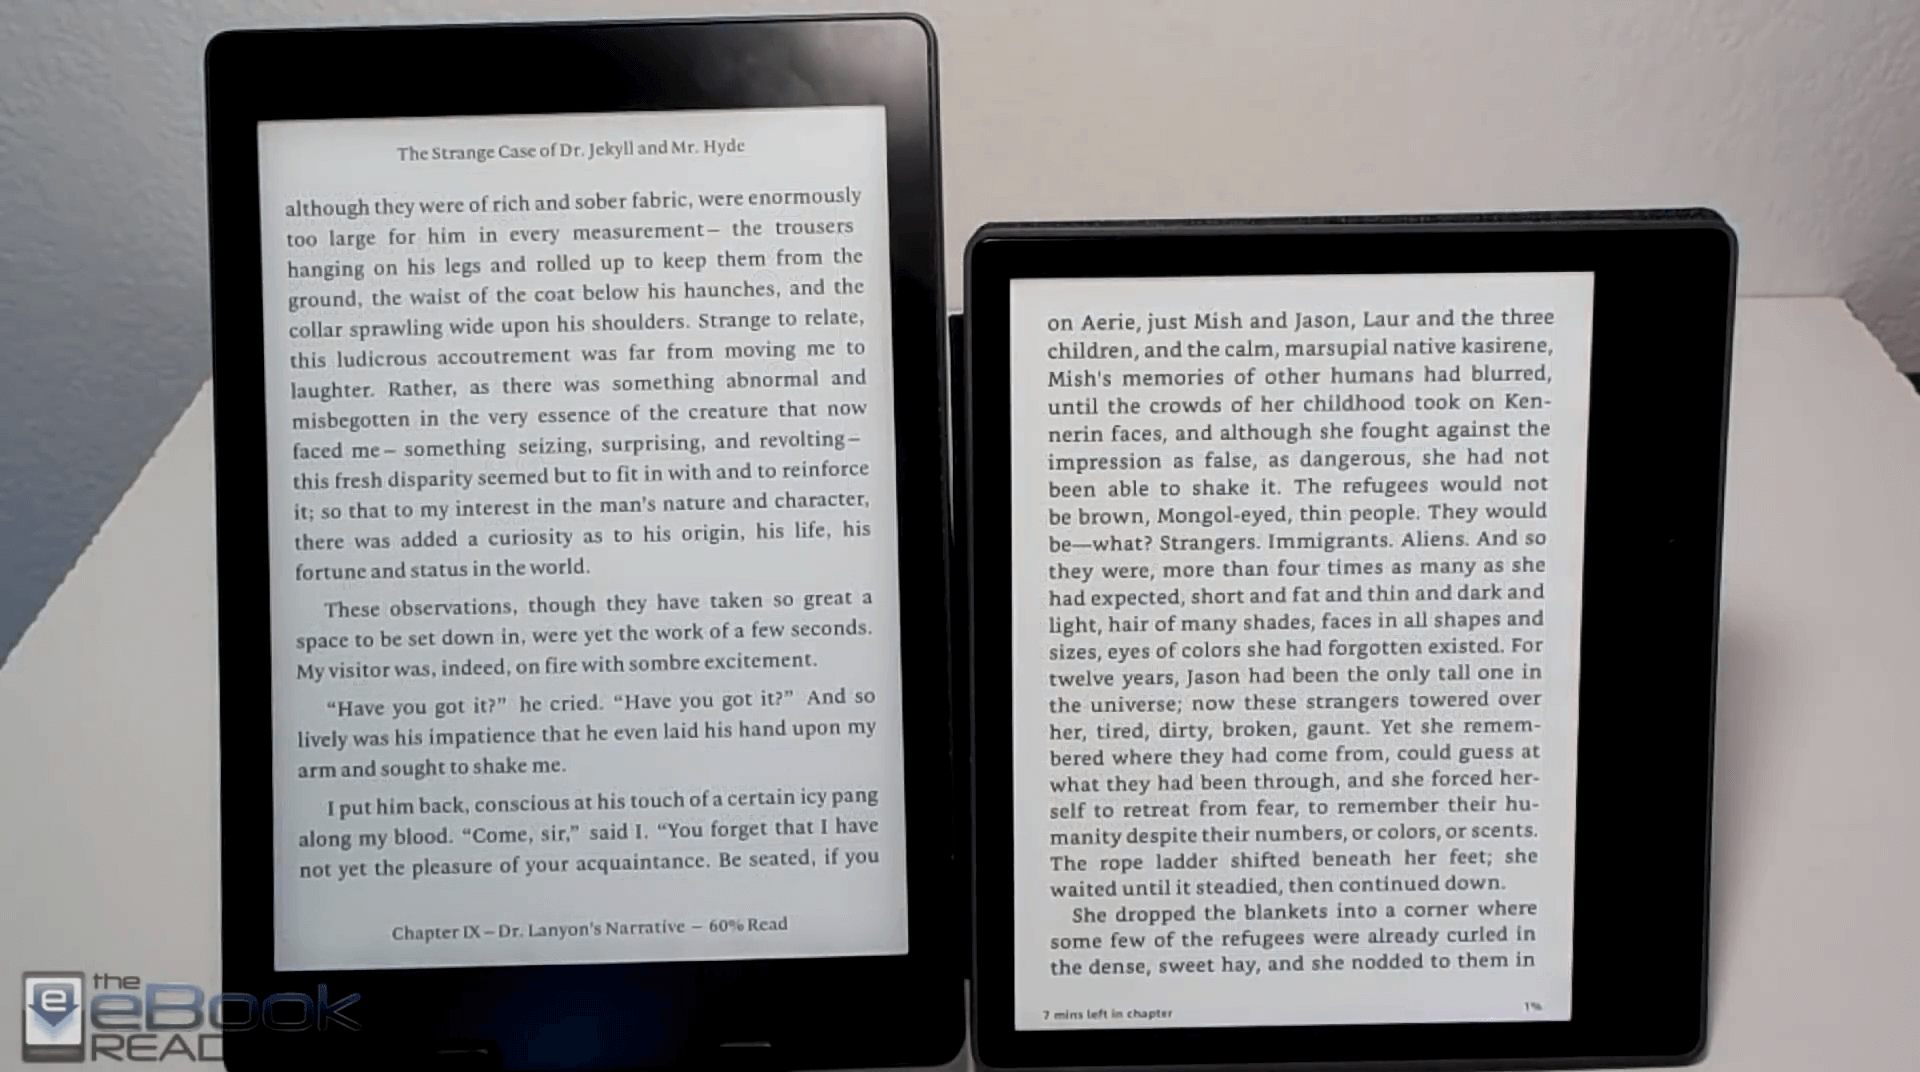 Aura ONE 与 Kindle Oasis (2018) （来源：The eBook Reader）